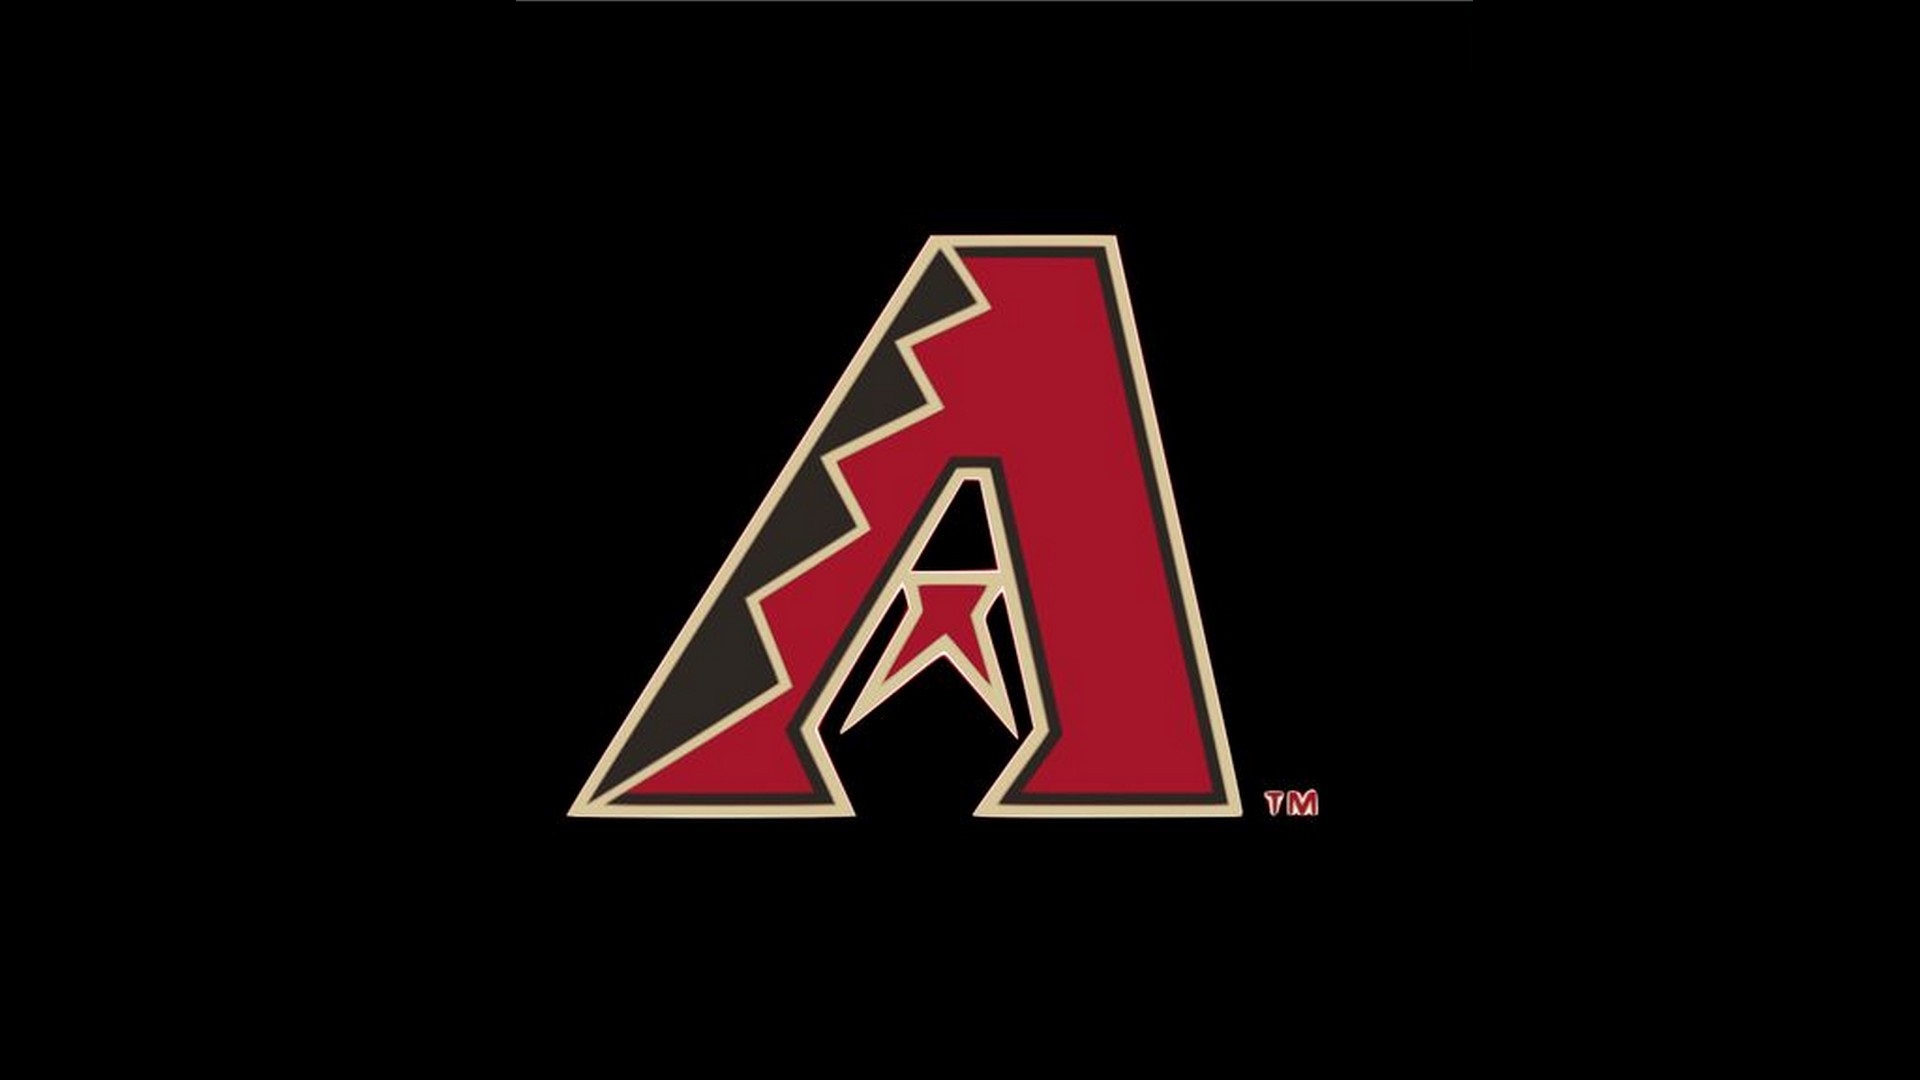 Wallpapers HD Arizona Diamondbacks with high-resolution 1920x1080 pixel. You can use this wallpaper for Mac Desktop Wallpaper, Laptop Screensavers, Android Wallpapers, Tablet or iPhone Home Screen and another mobile phone device